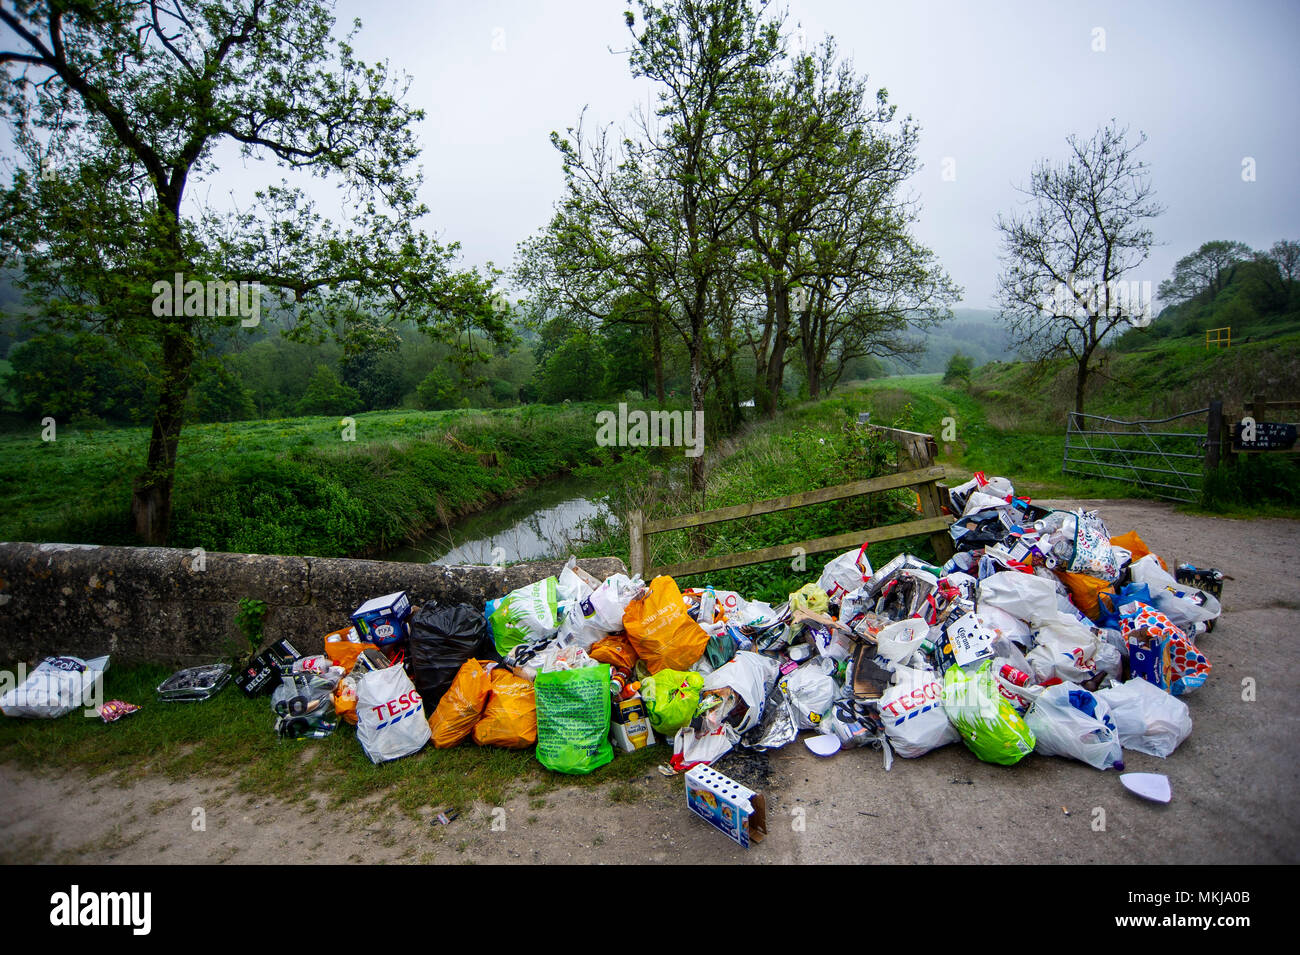 Rubbish left by visitors after the Bank Holiday weekend at beauty spot Warleigh Weir on the River Avon near Bath in Somerset. Stock Photo